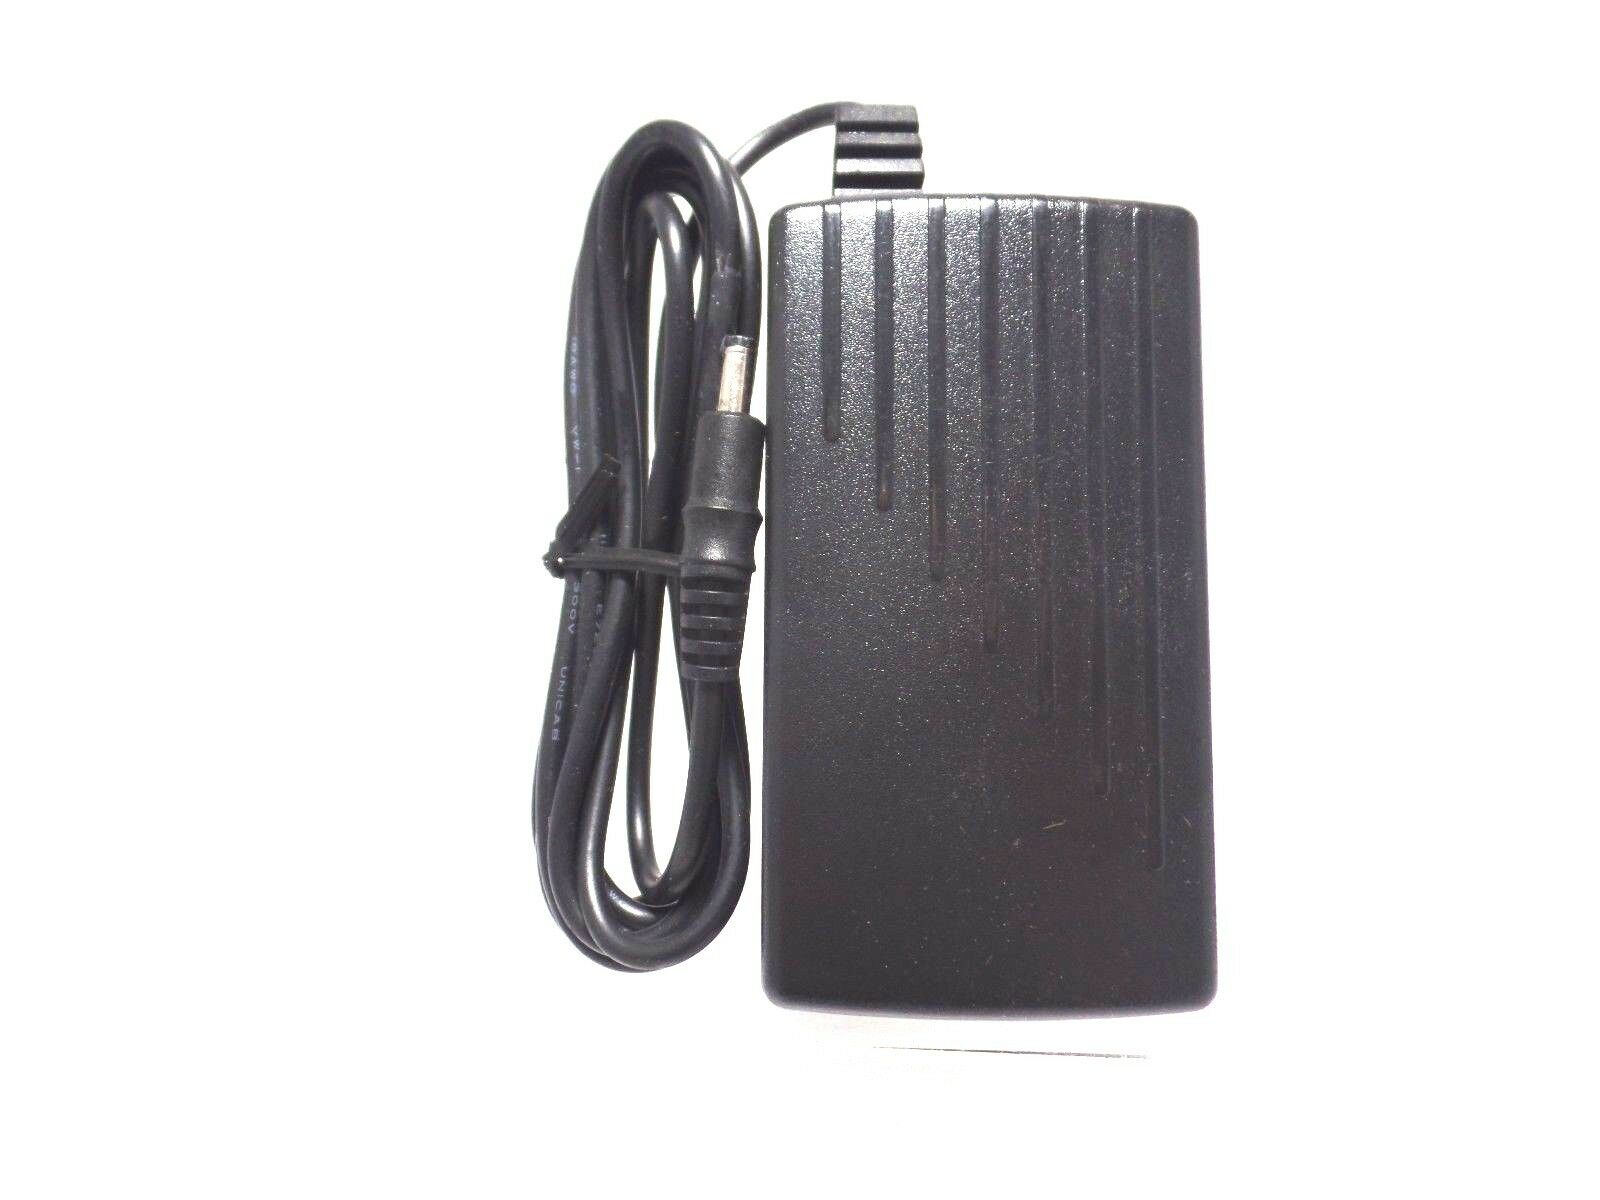 Motorola 50-14000-239R AC Adapter 9V 2A, For Phaser P360, P370 For LS3478-ER Condition: "Brand New. No retail packaging